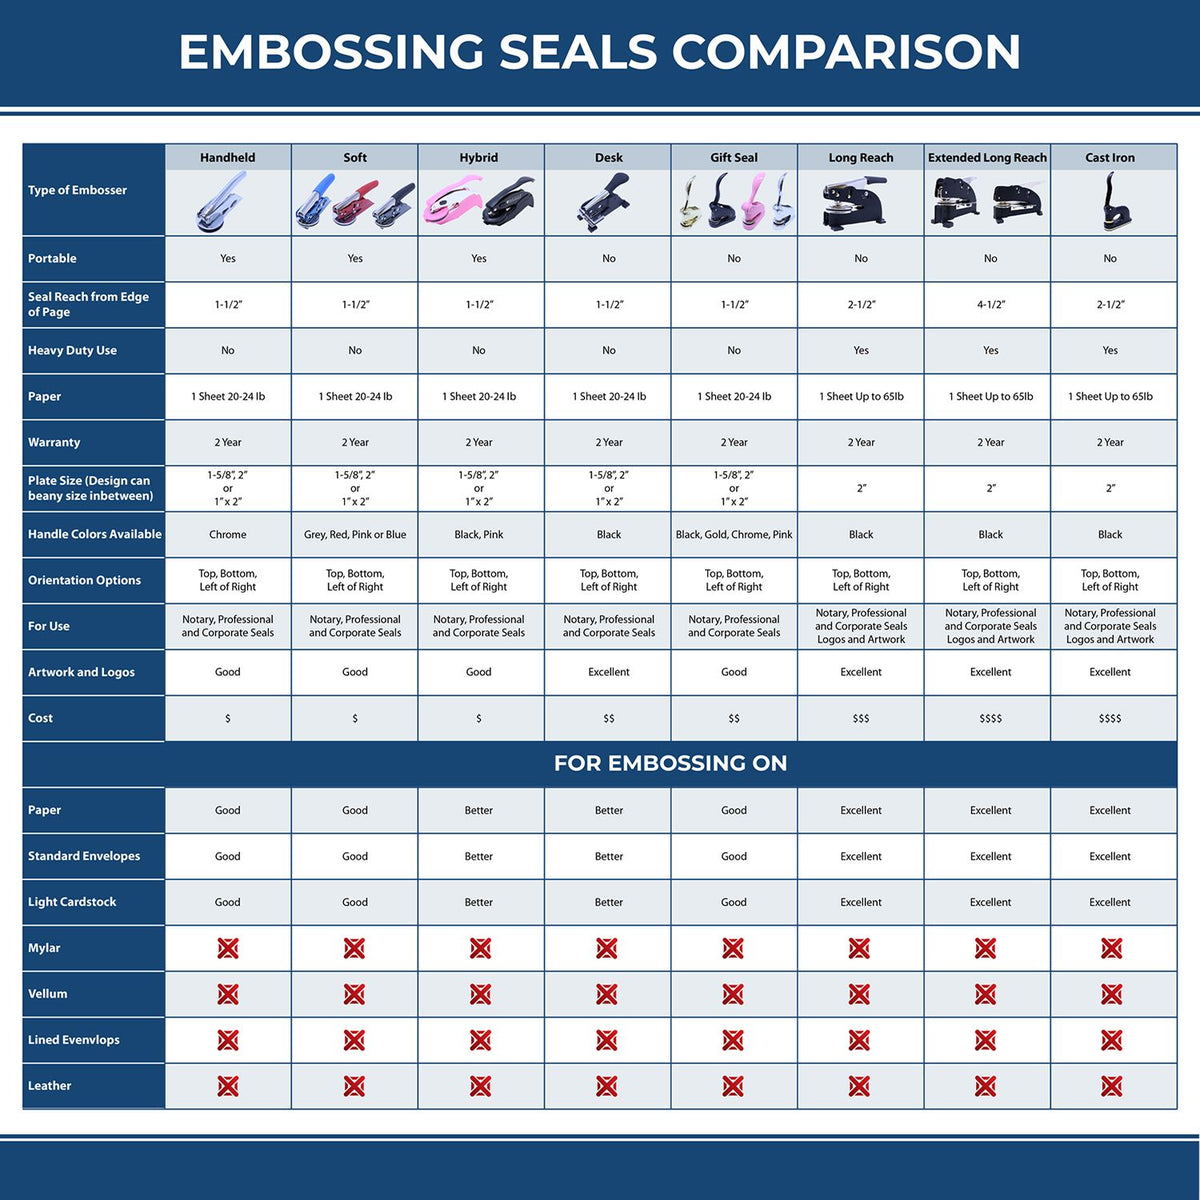 A comparison chart for the different types of mount models available for the State of Massachusetts Extended Long Reach Geologist Seal